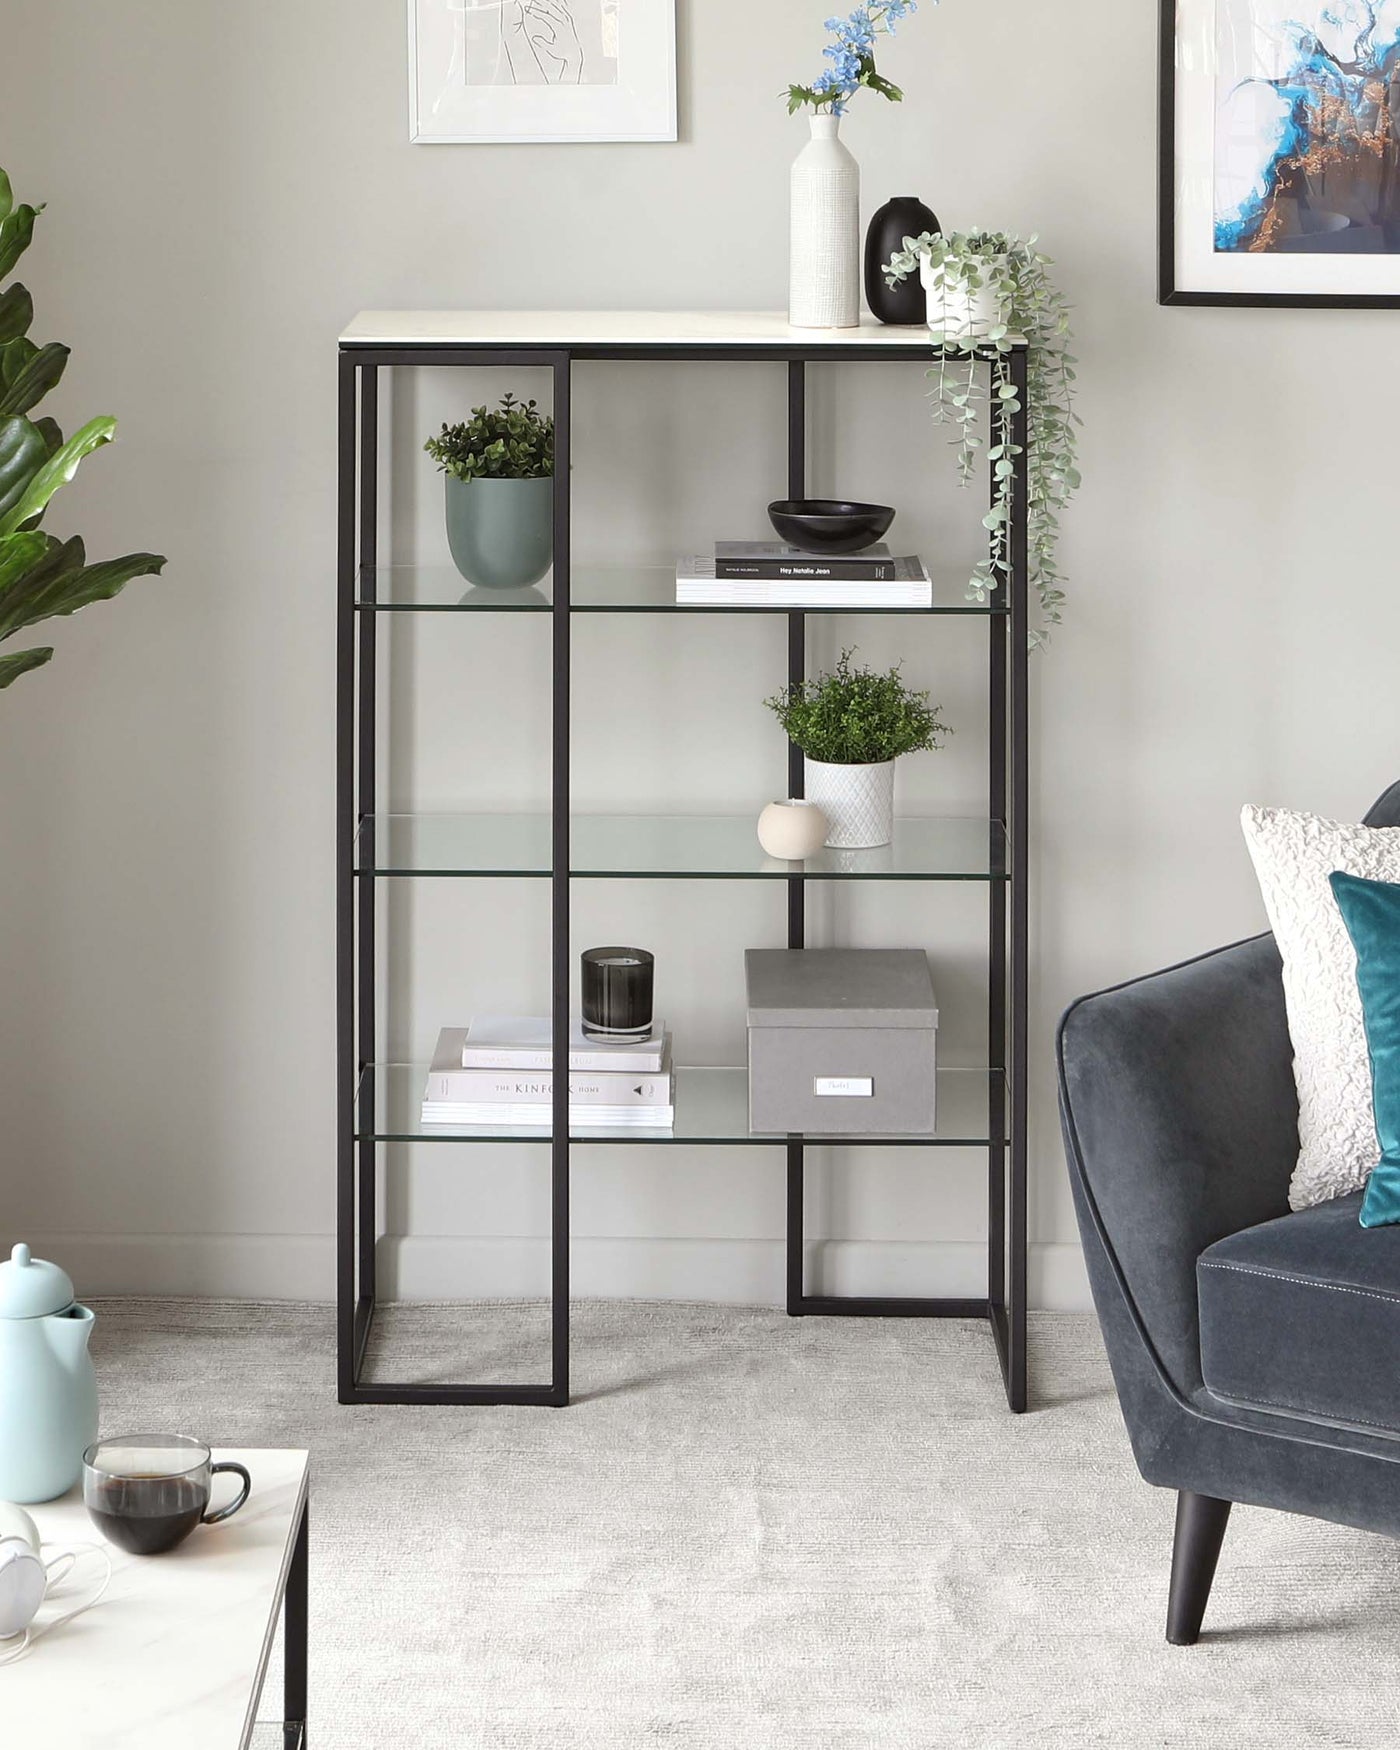 A modern five-tiered shelving unit featuring a sleek black metal frame with rectangular and square shelves of varying heights, complemented by a dark grey upholstered armchair with a textured throw pillow, set against a neutral room decor.